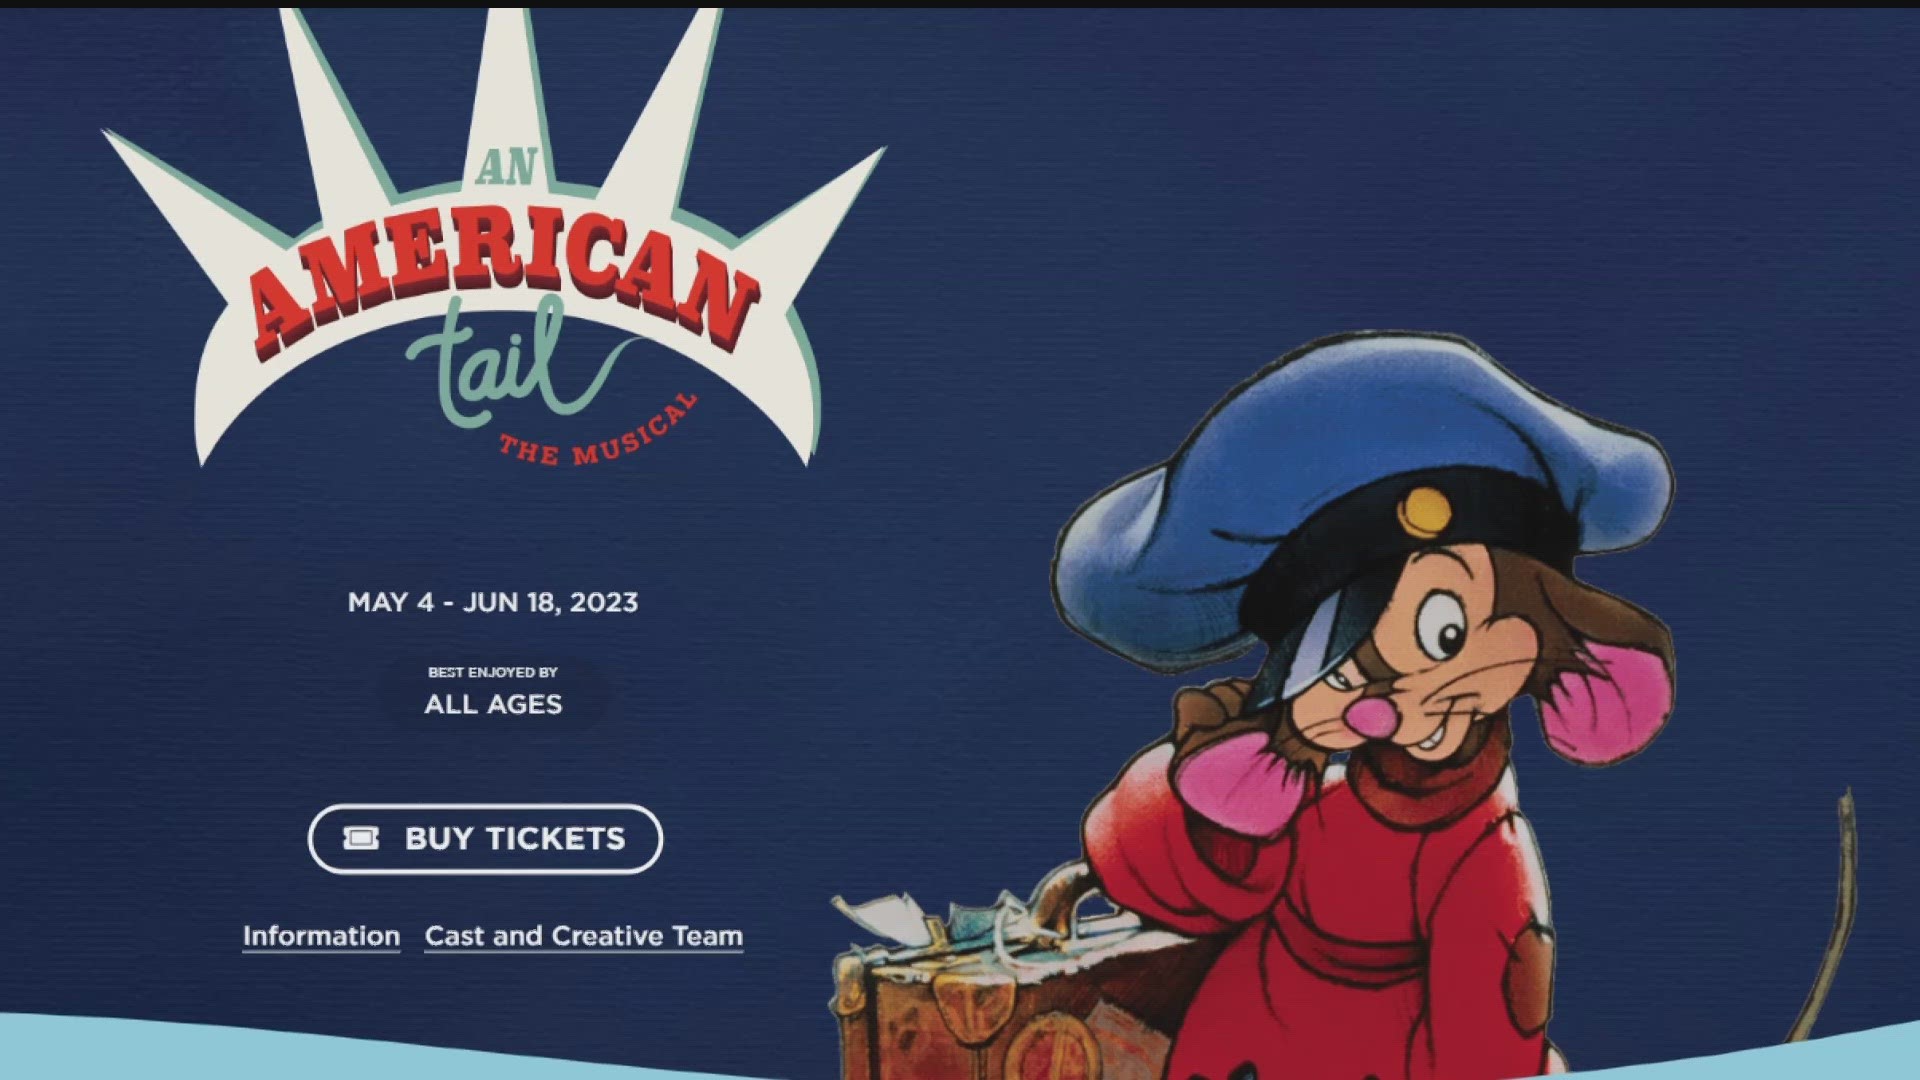 Tony Award-winning playwright Itamar Moses helped bring "An American Tail the Musical" to life at Children's Theatre Company, on stage now through June 18.